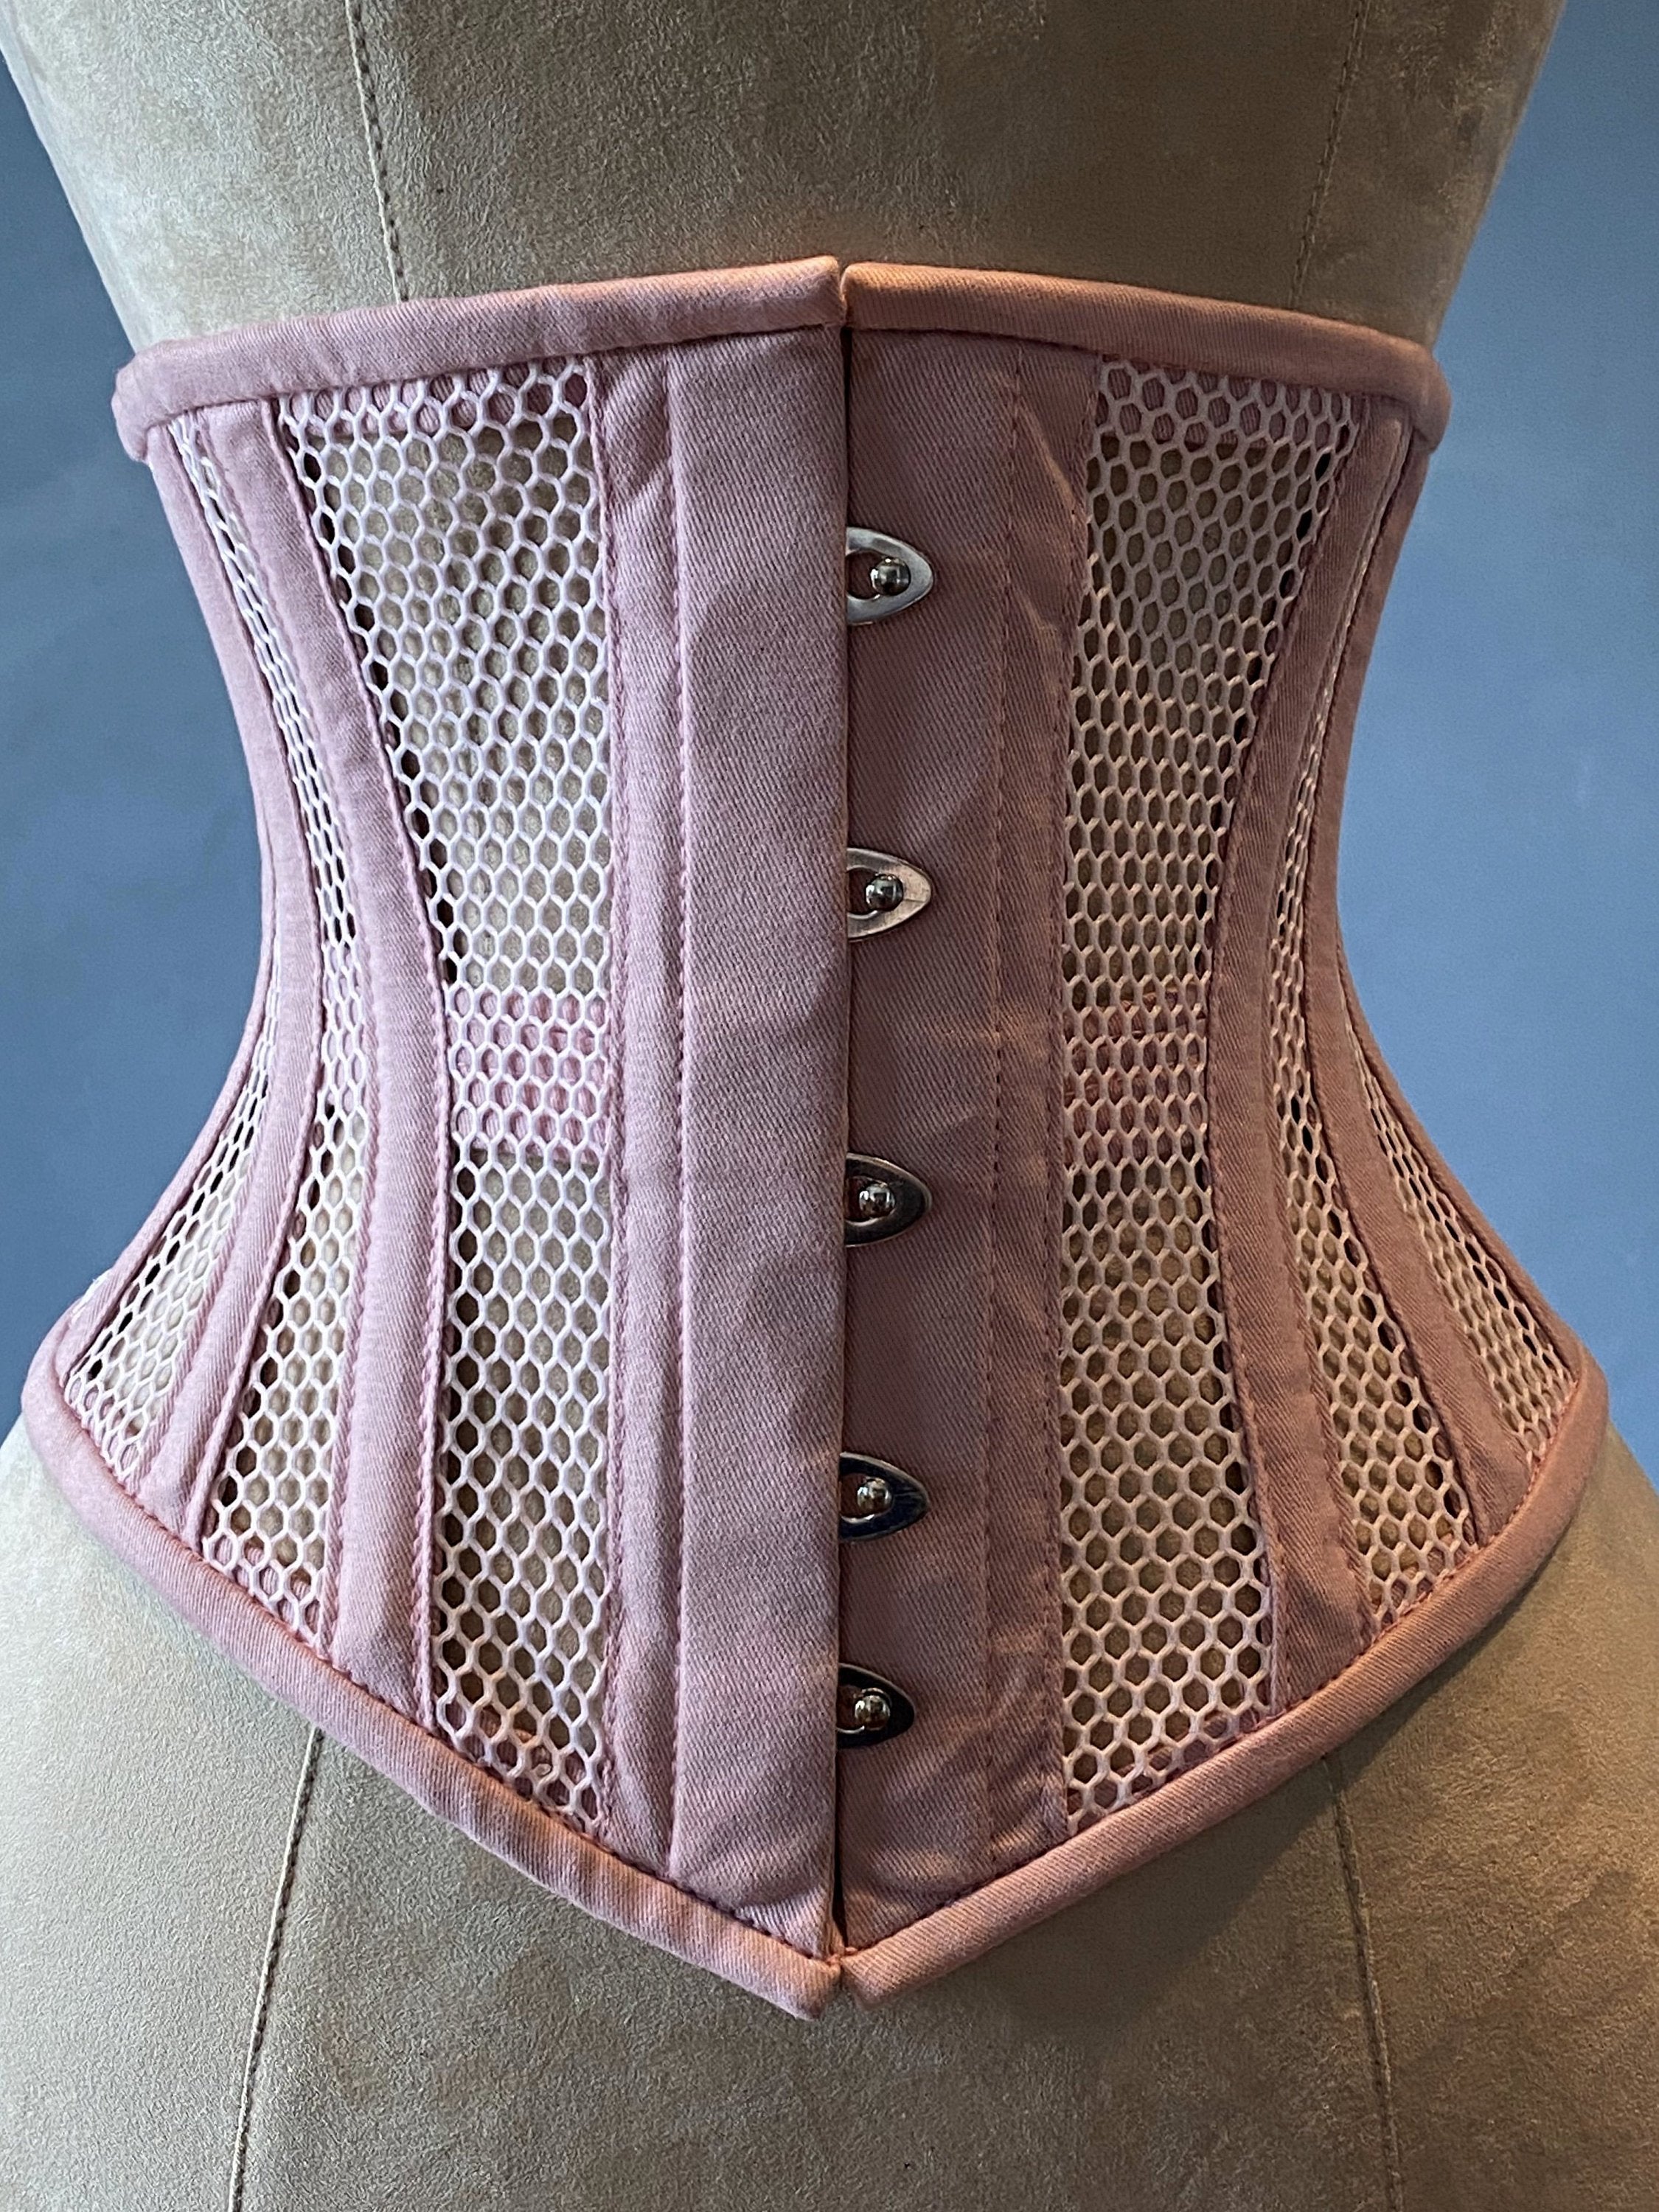 Corset Anatomy Steel Boned, Tight Lacing Corsets for Beginners